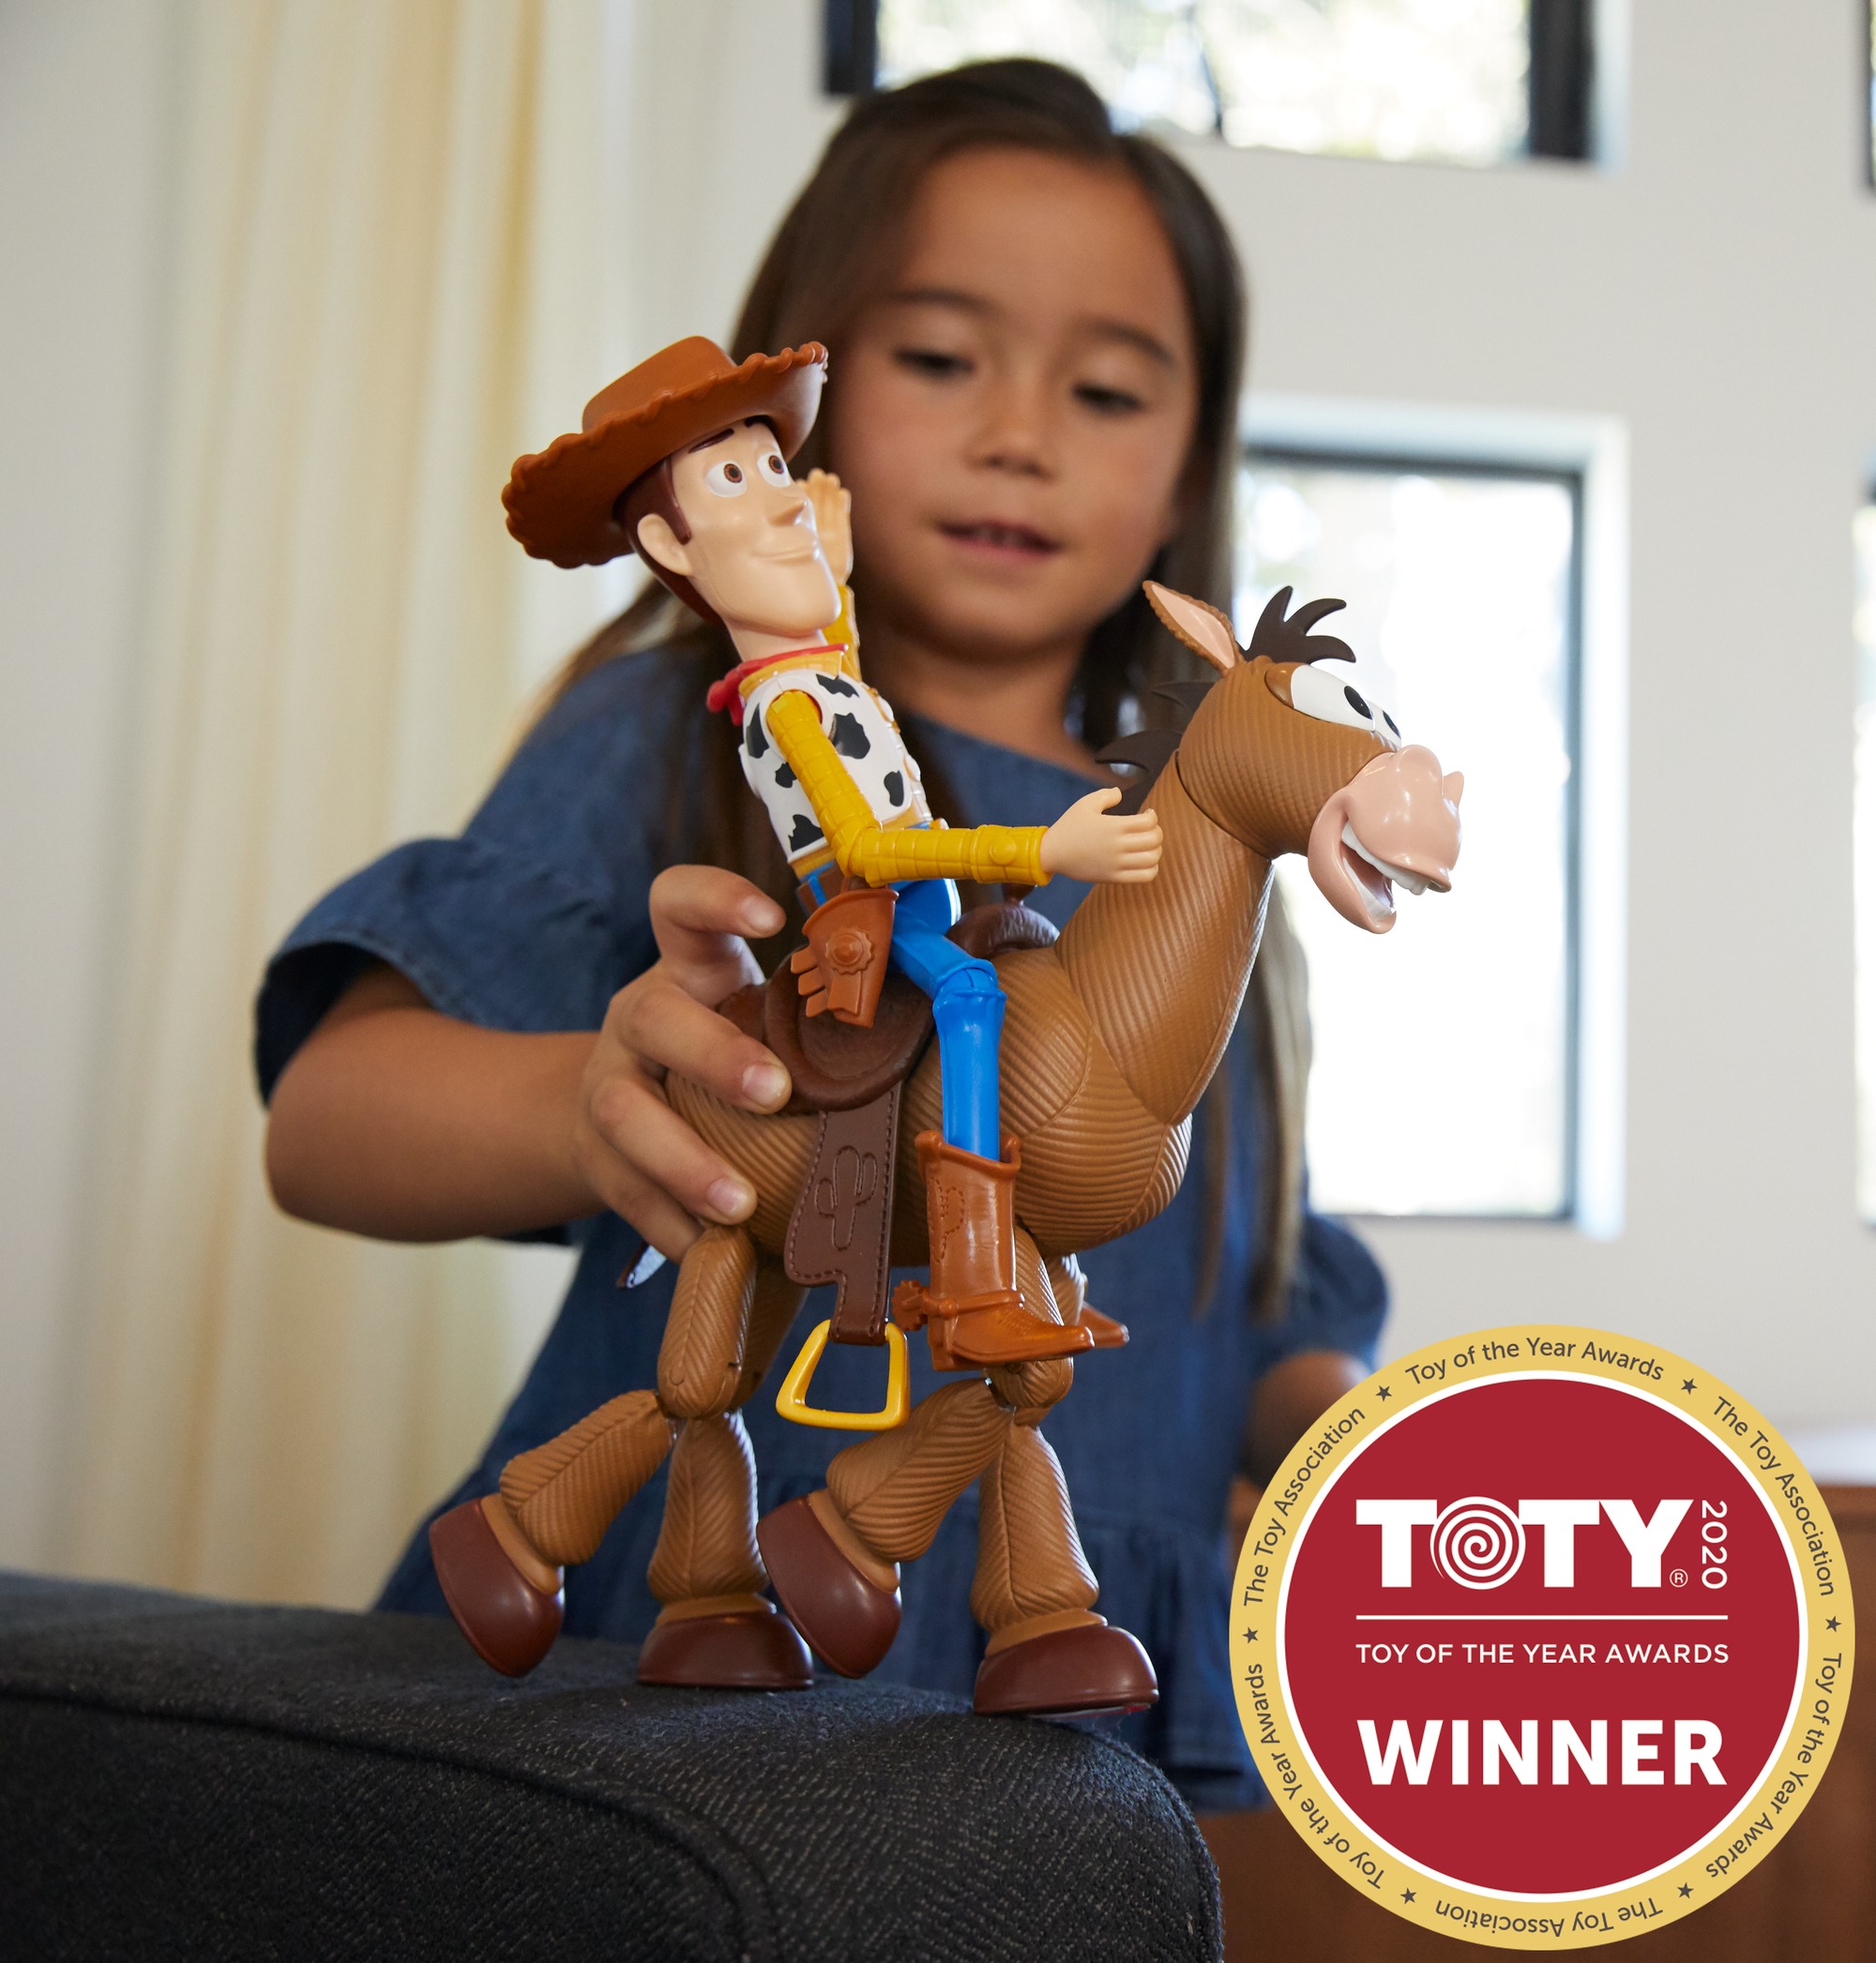 Award Winning Disney/Pixar Toy Story 4 Woody And Buzz Lightyear 2-Character Pack, Movie-Inspired Relative-Scale For Storytelling Play - image 3 of 8